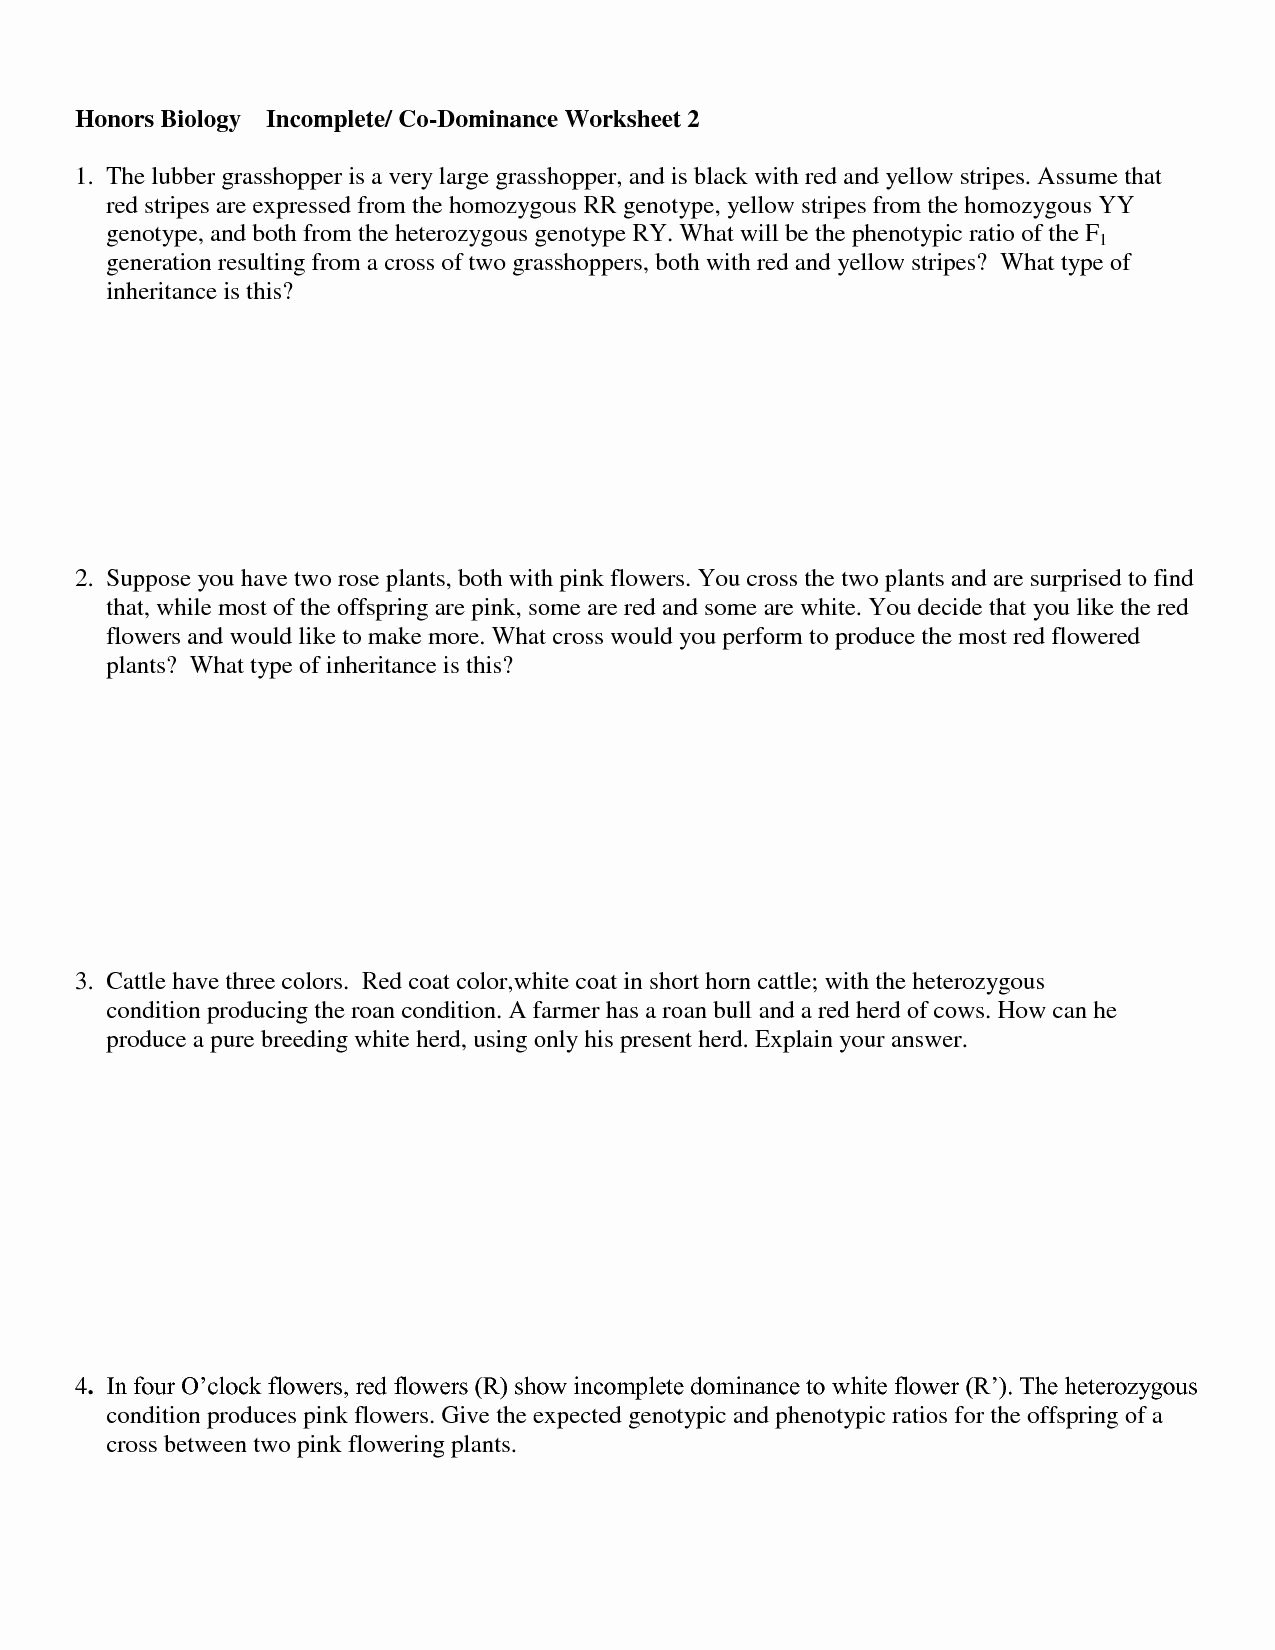 Incomplete and Codominance Worksheet Best Of Codominance In Plete Dominance Worksheet Answers